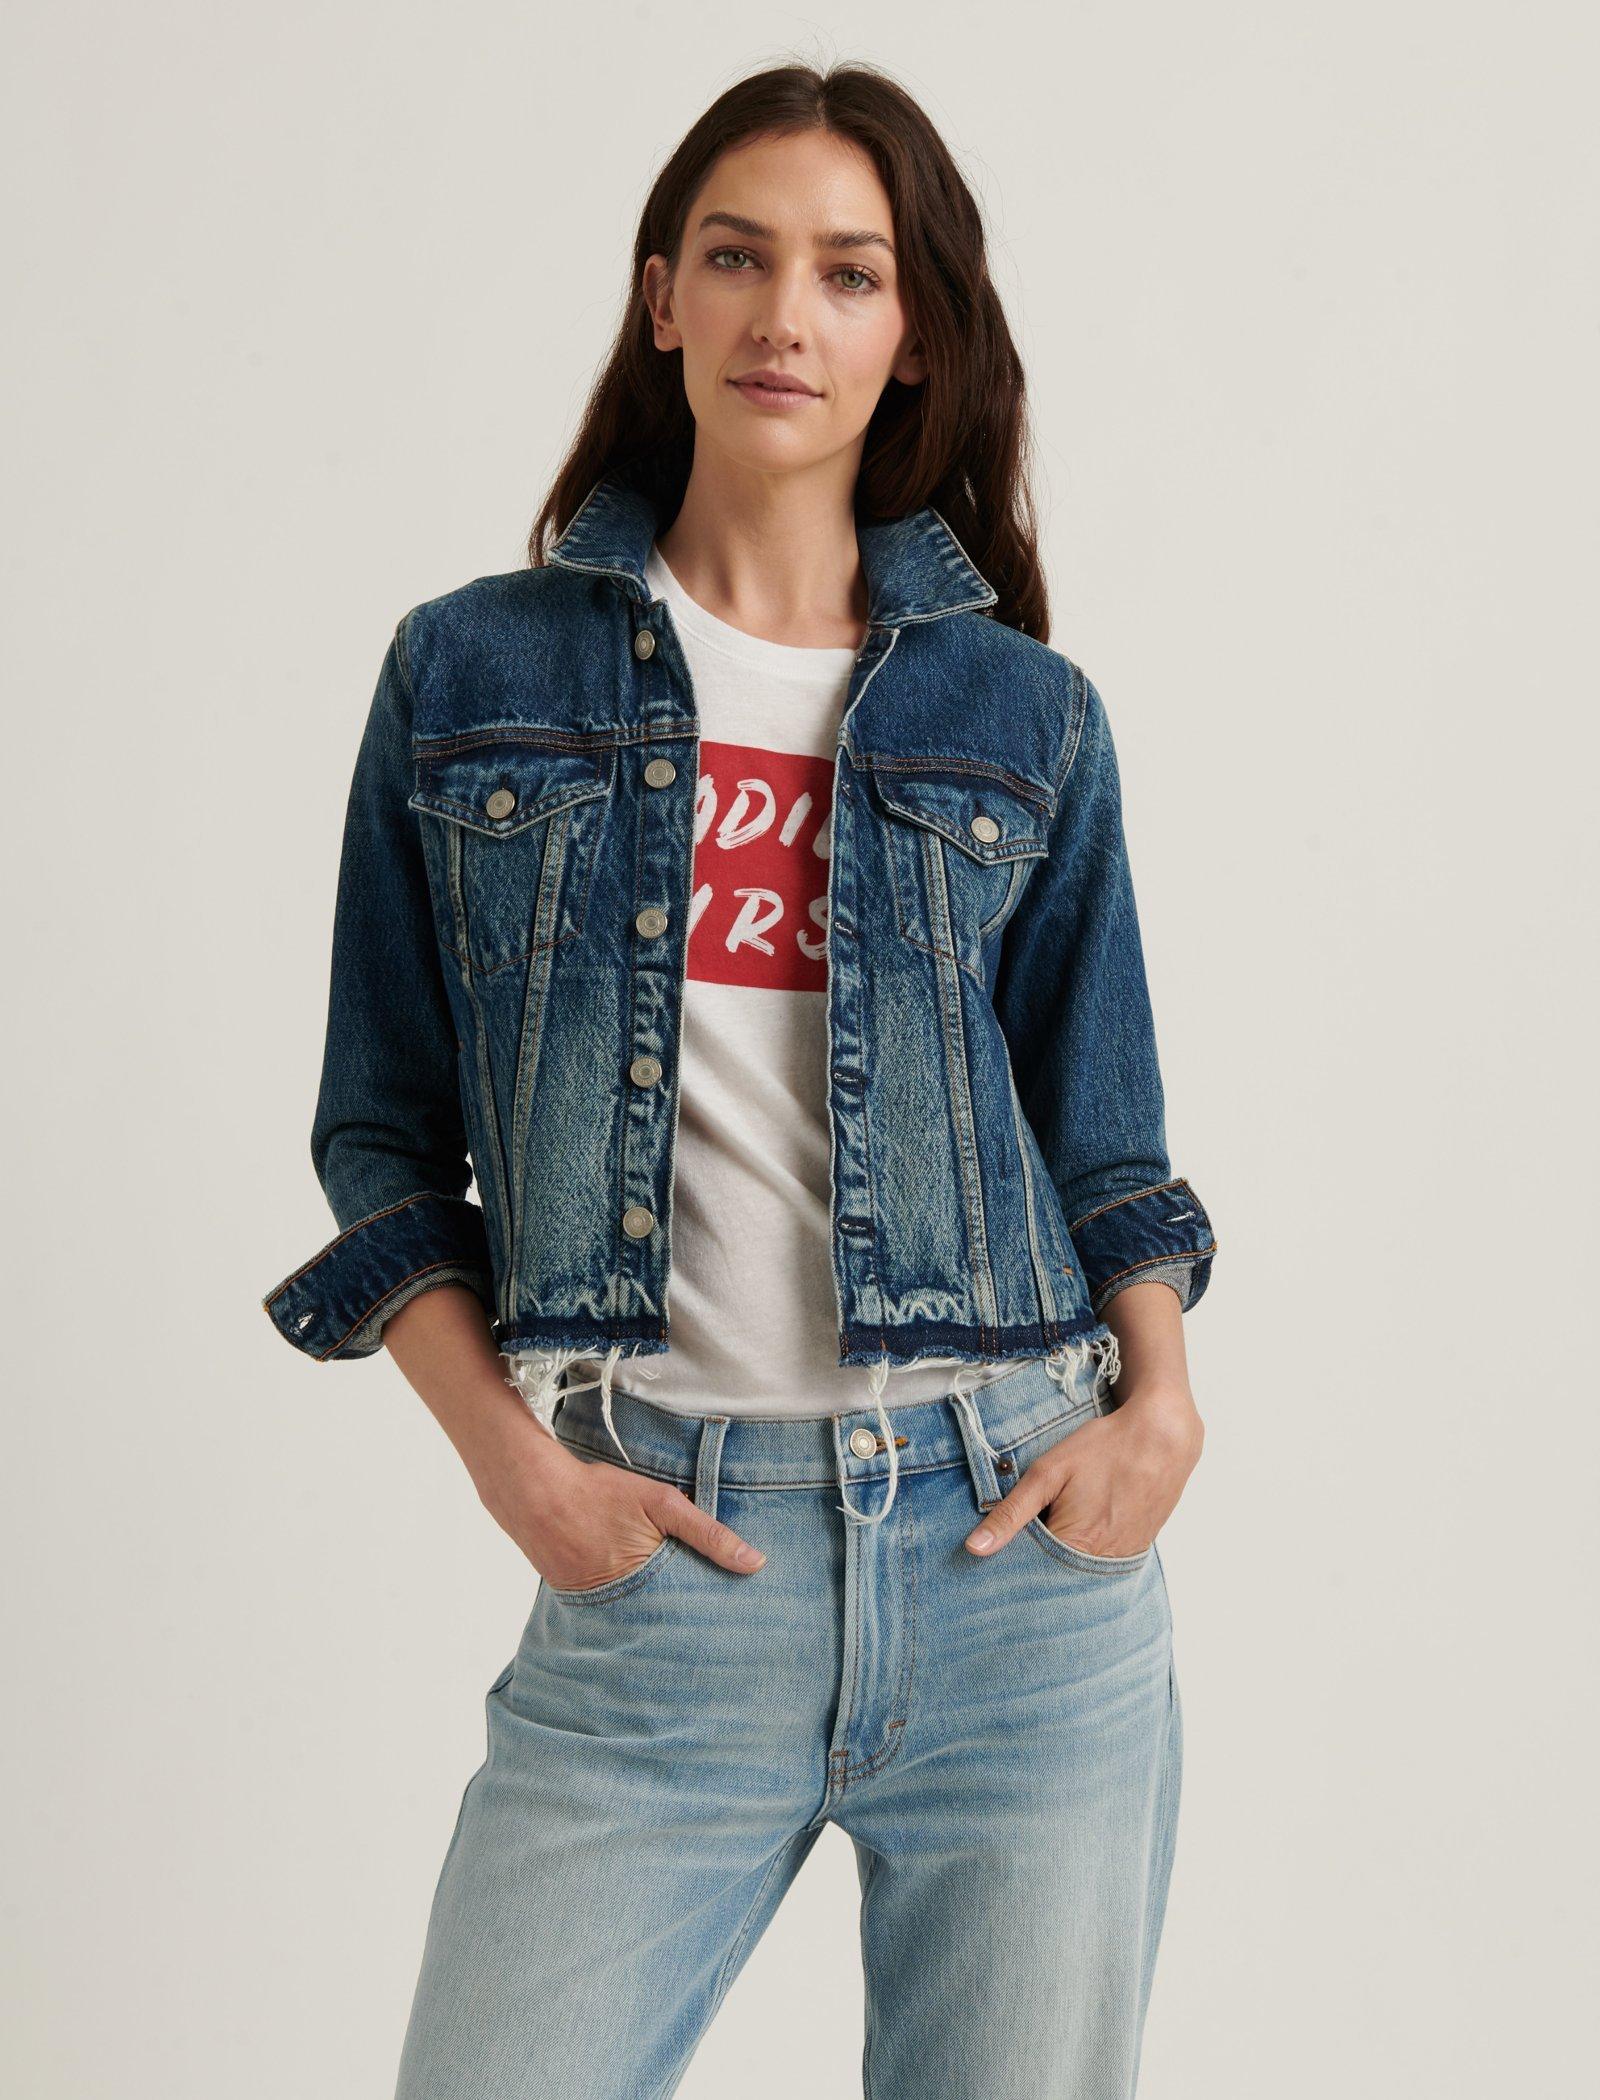 lucky brand high rise tomboy jeans